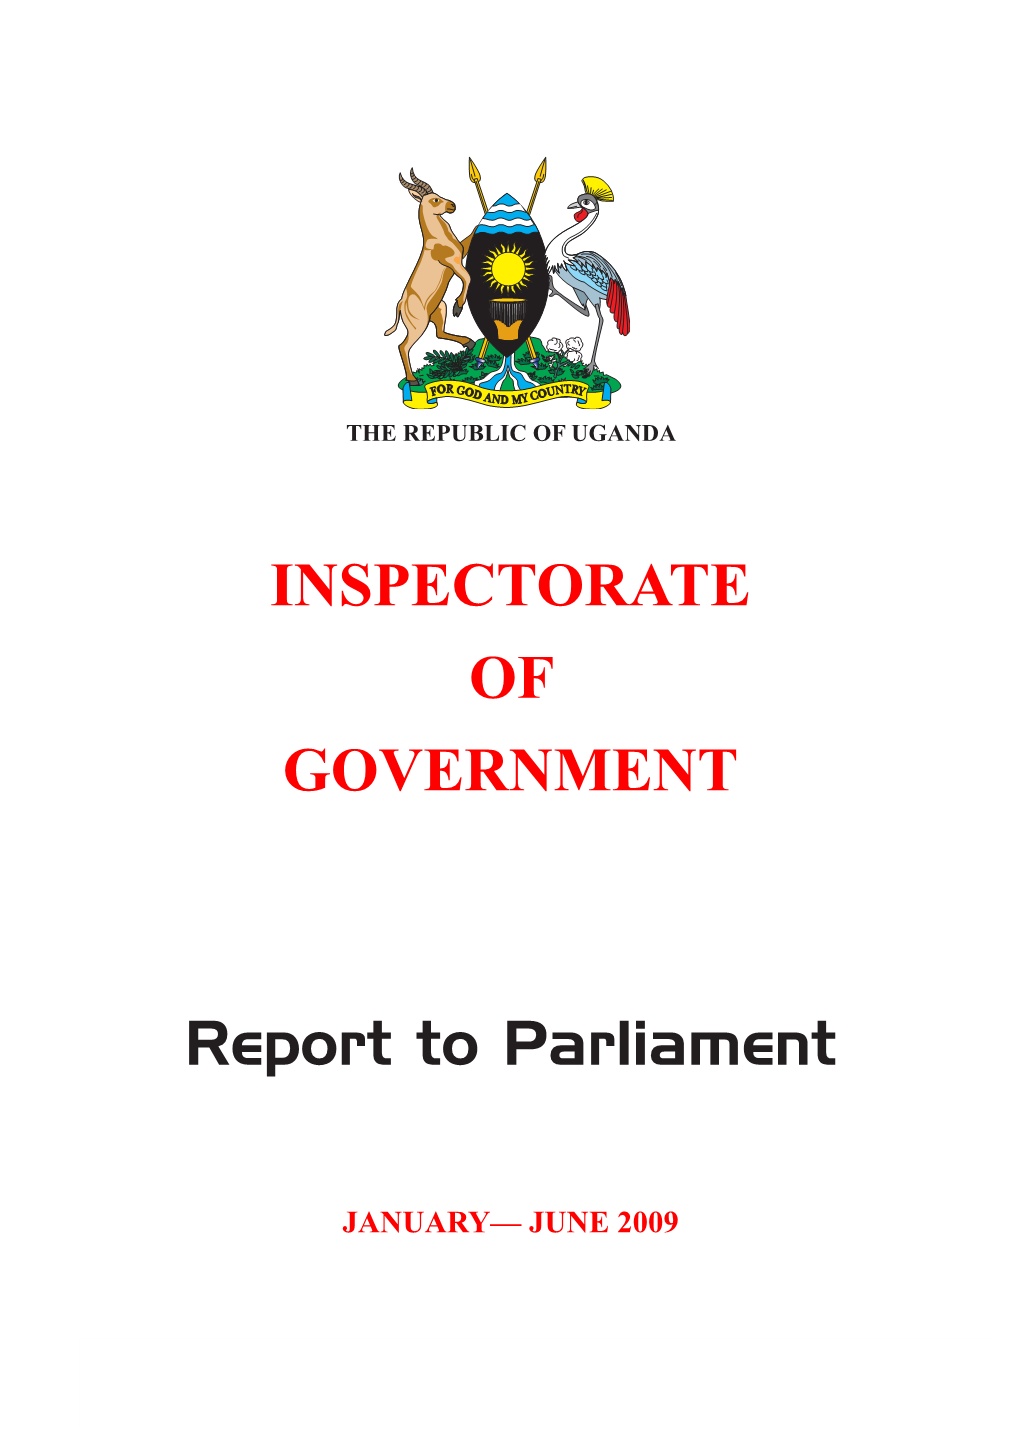 INSPECTORATE of GOVERNMENT.Indd